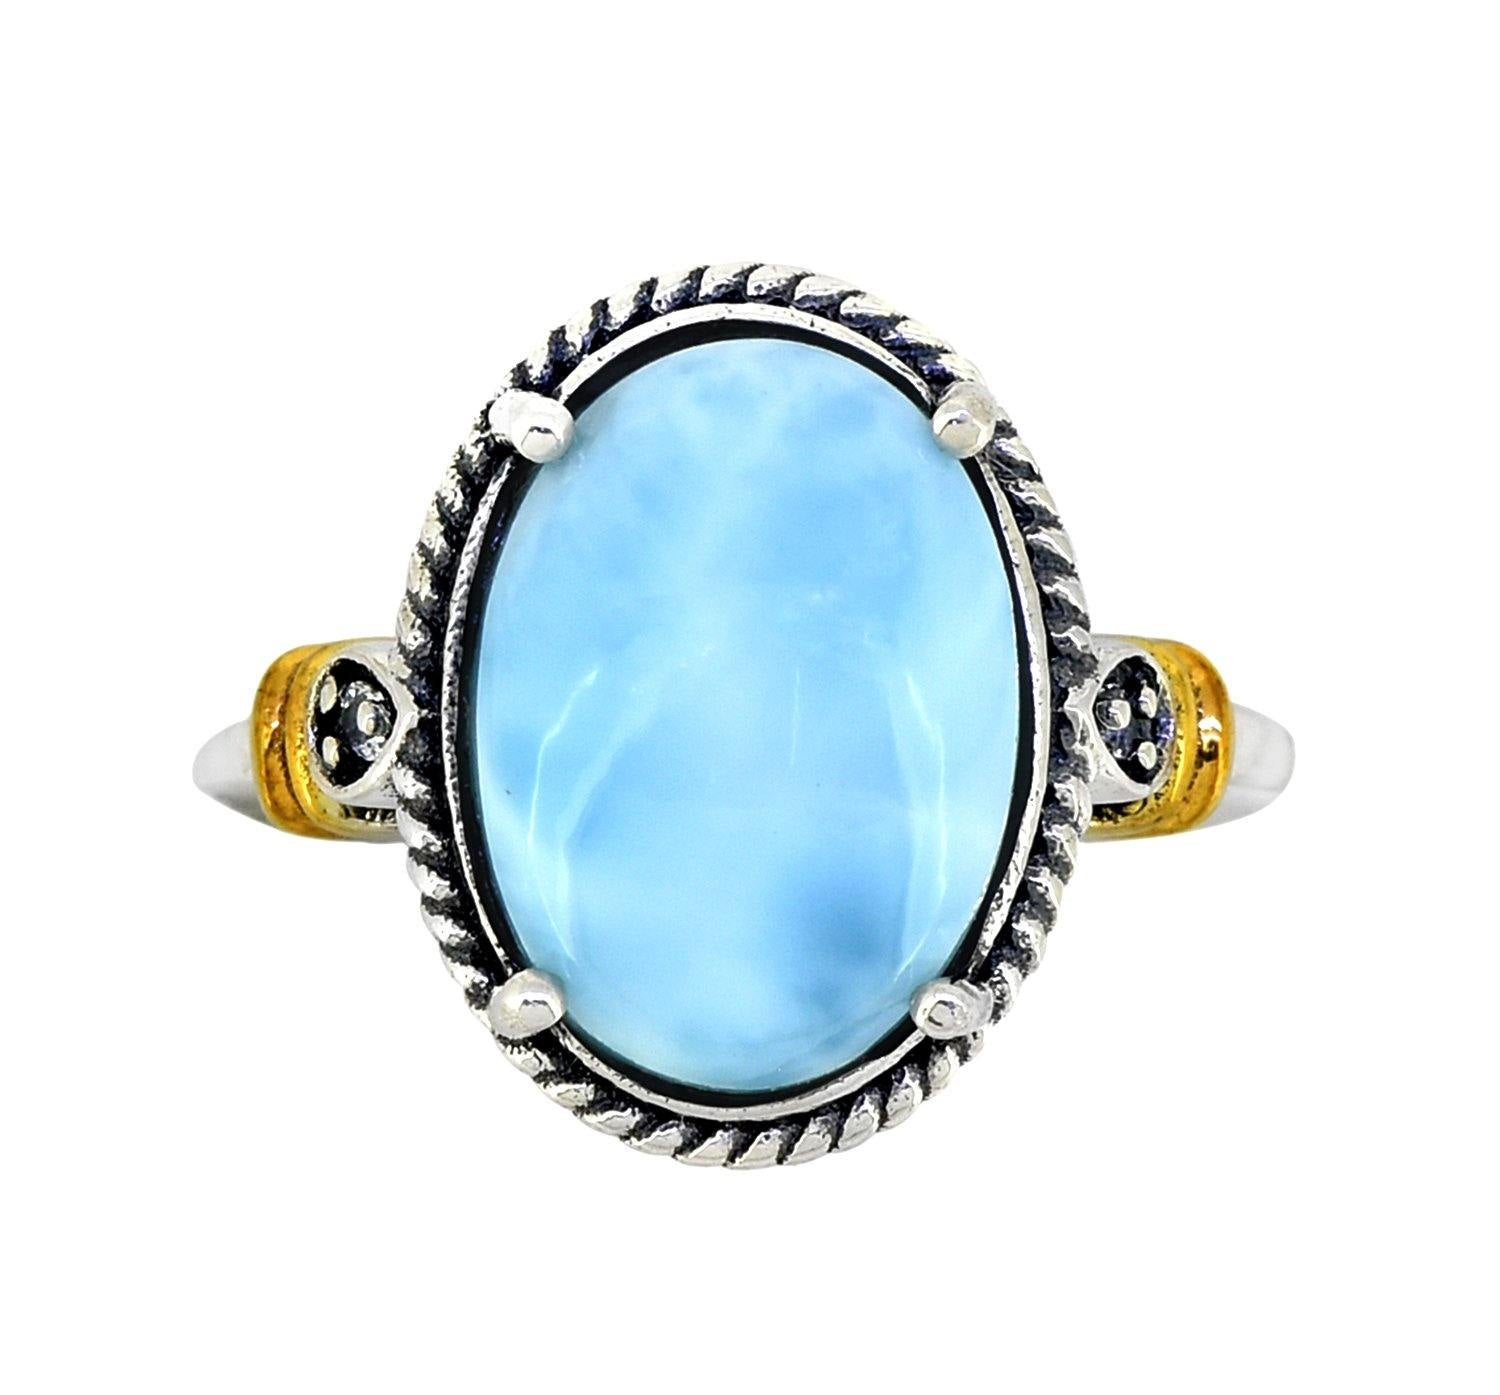 Larimar White Topaz Solid 925 Sterling Silver Gold Plated Ring Genuine Gemstone Jewelry - YoTreasure